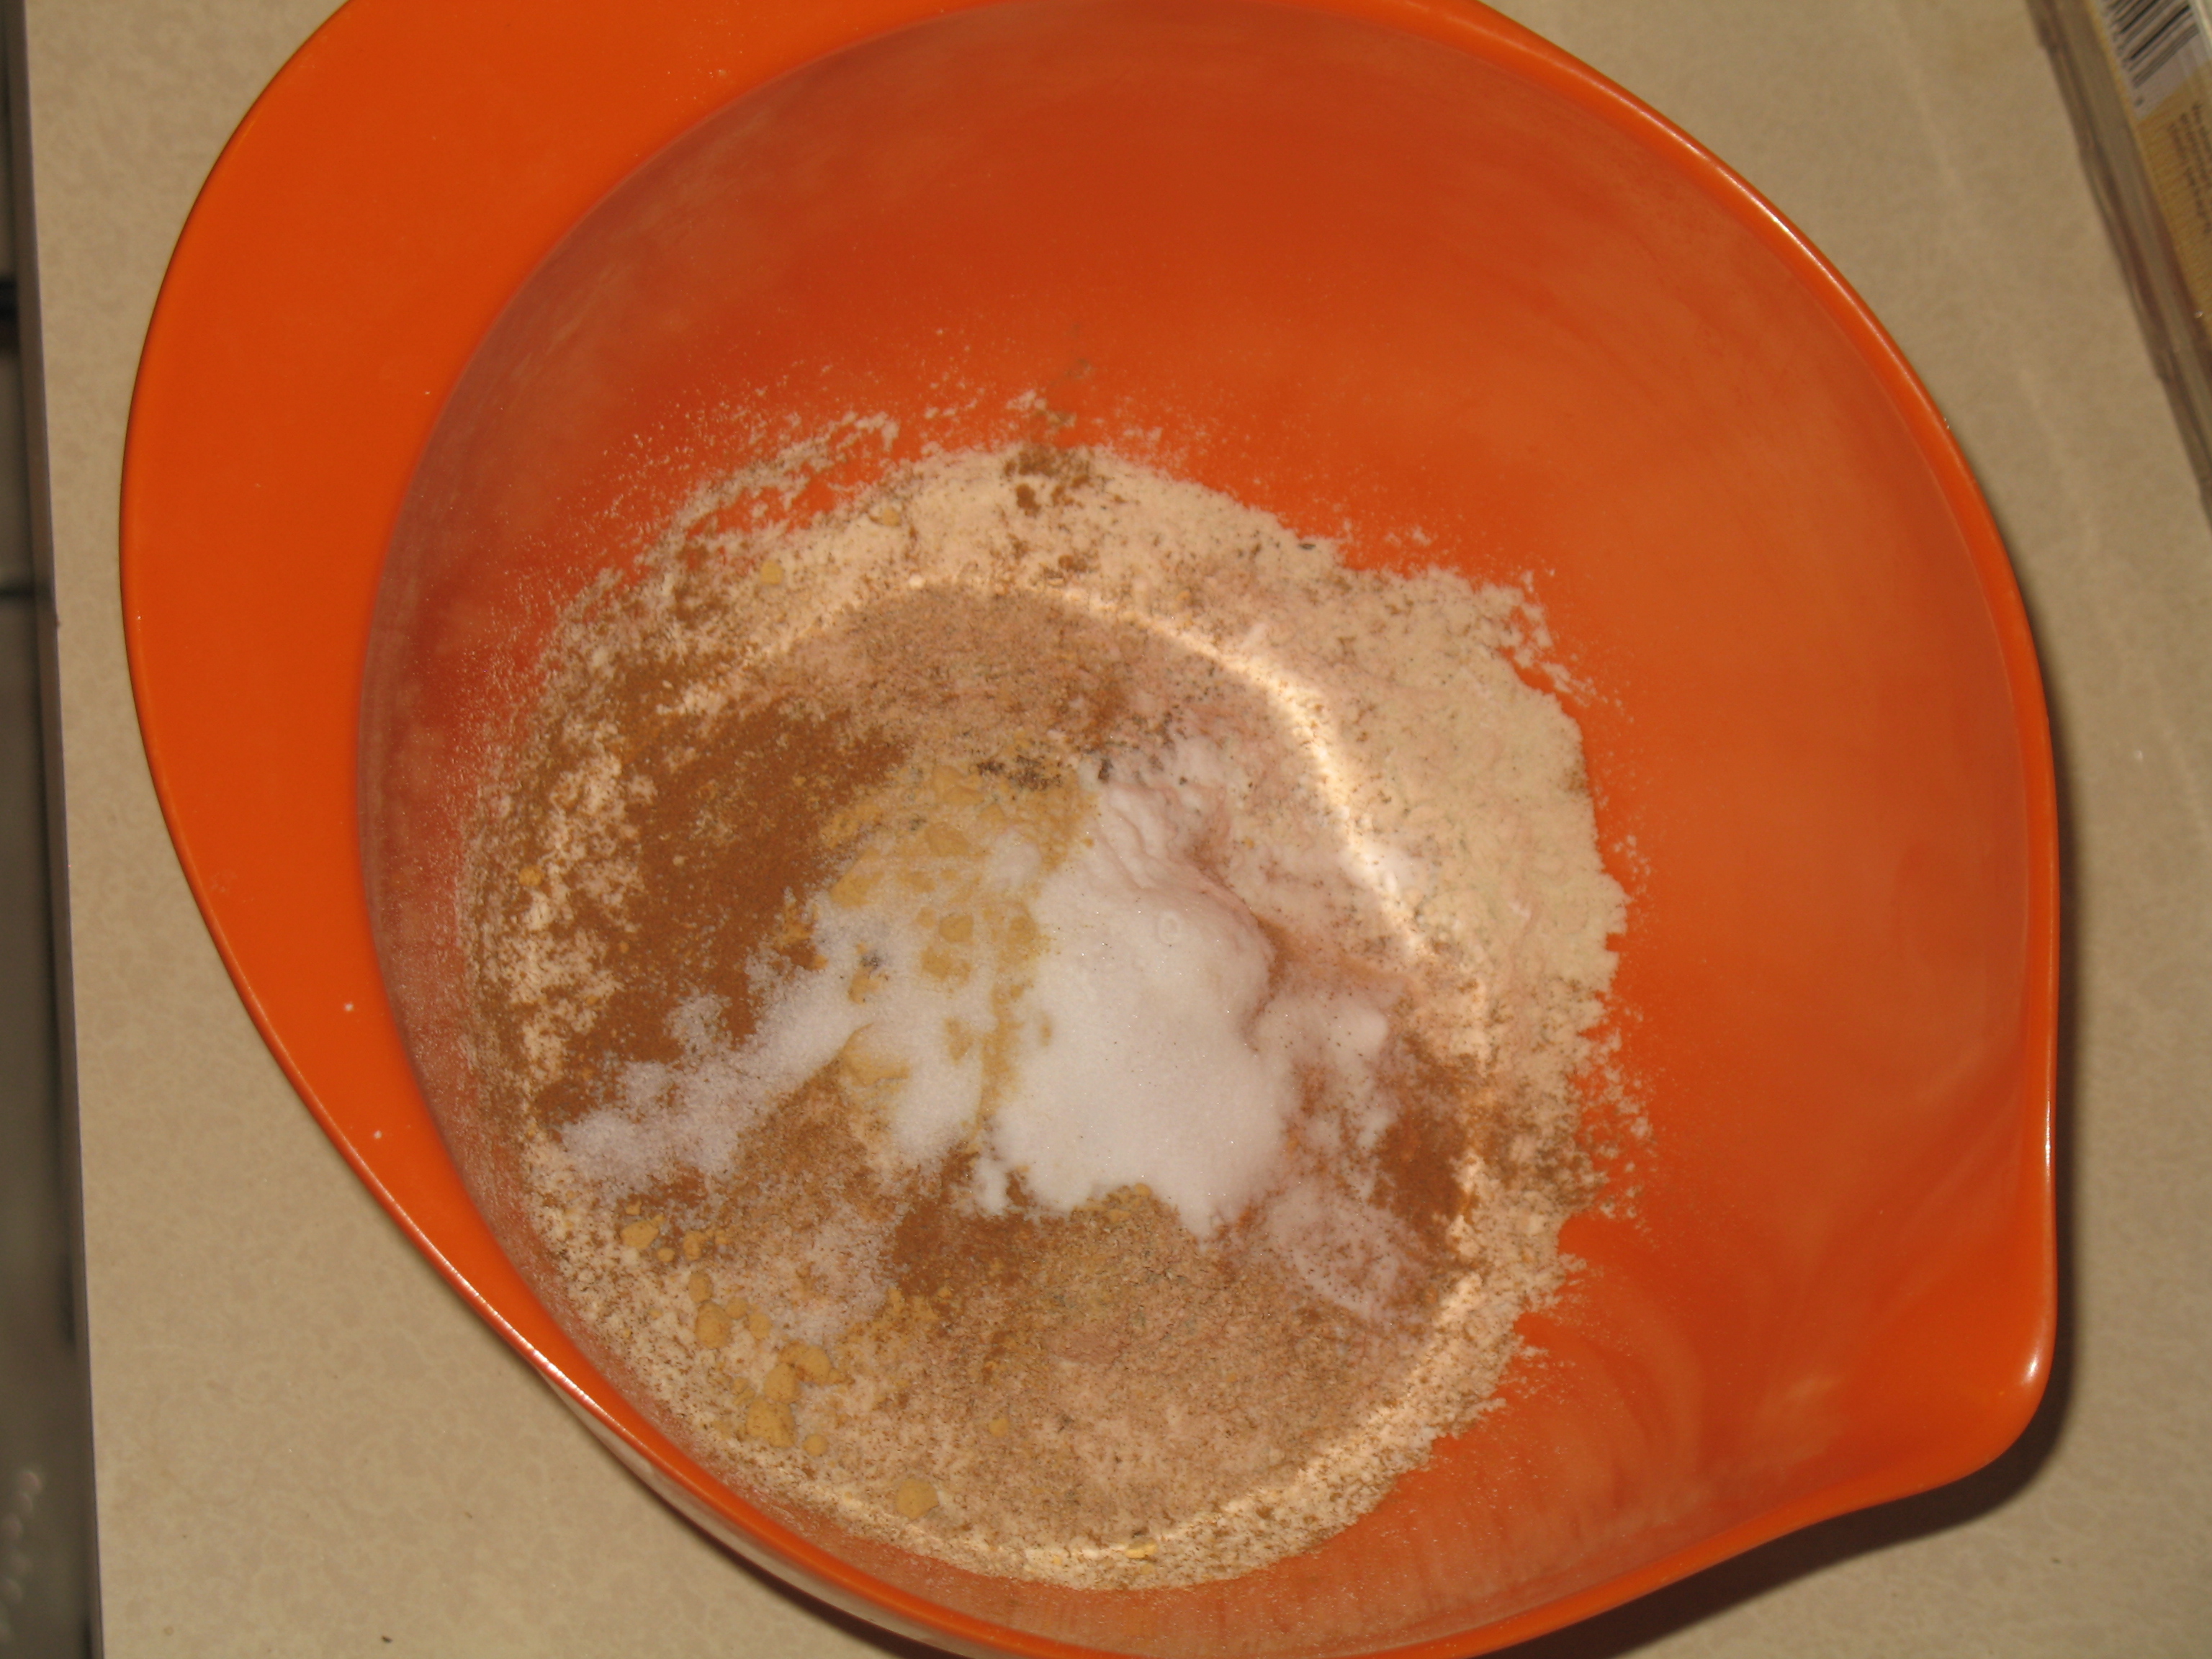 dry ingredients with spices